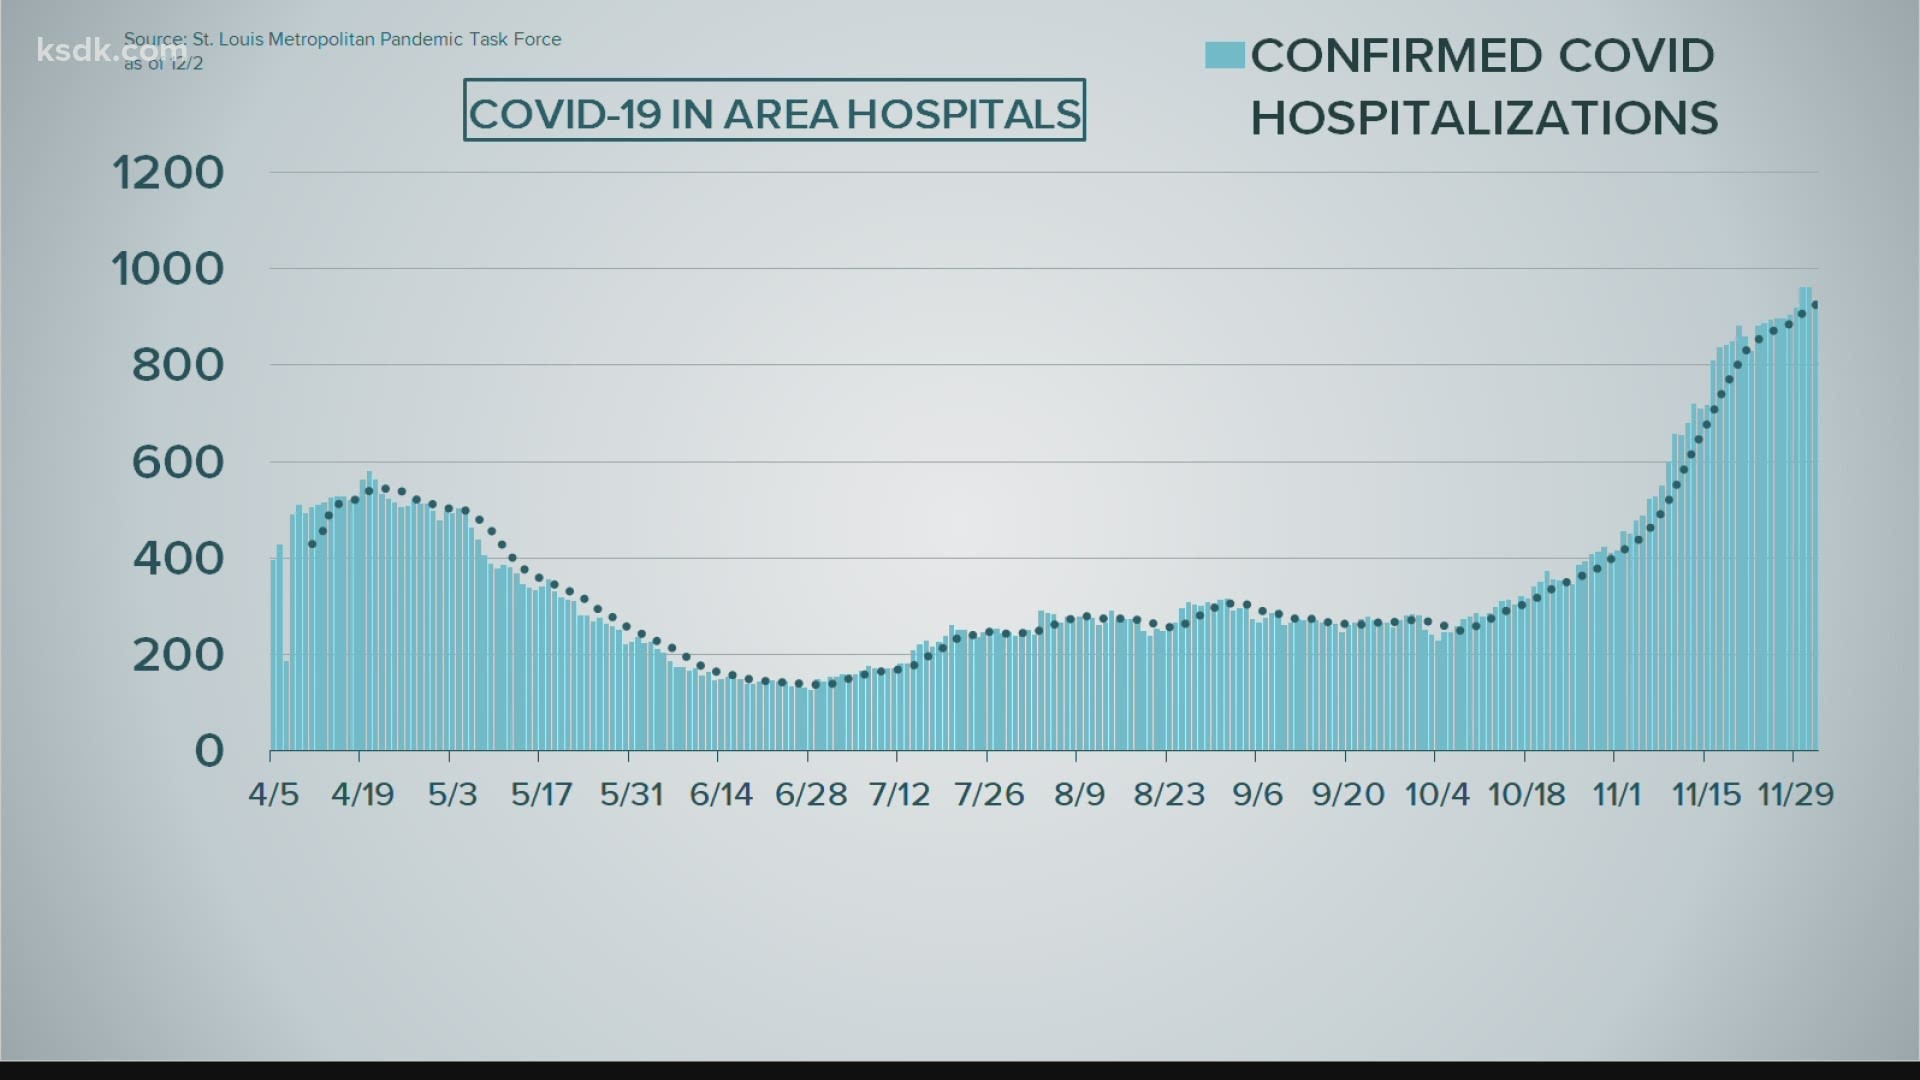 934 COVID-19 patients in area hospitals yesterday, down from 962 patients Tuesday